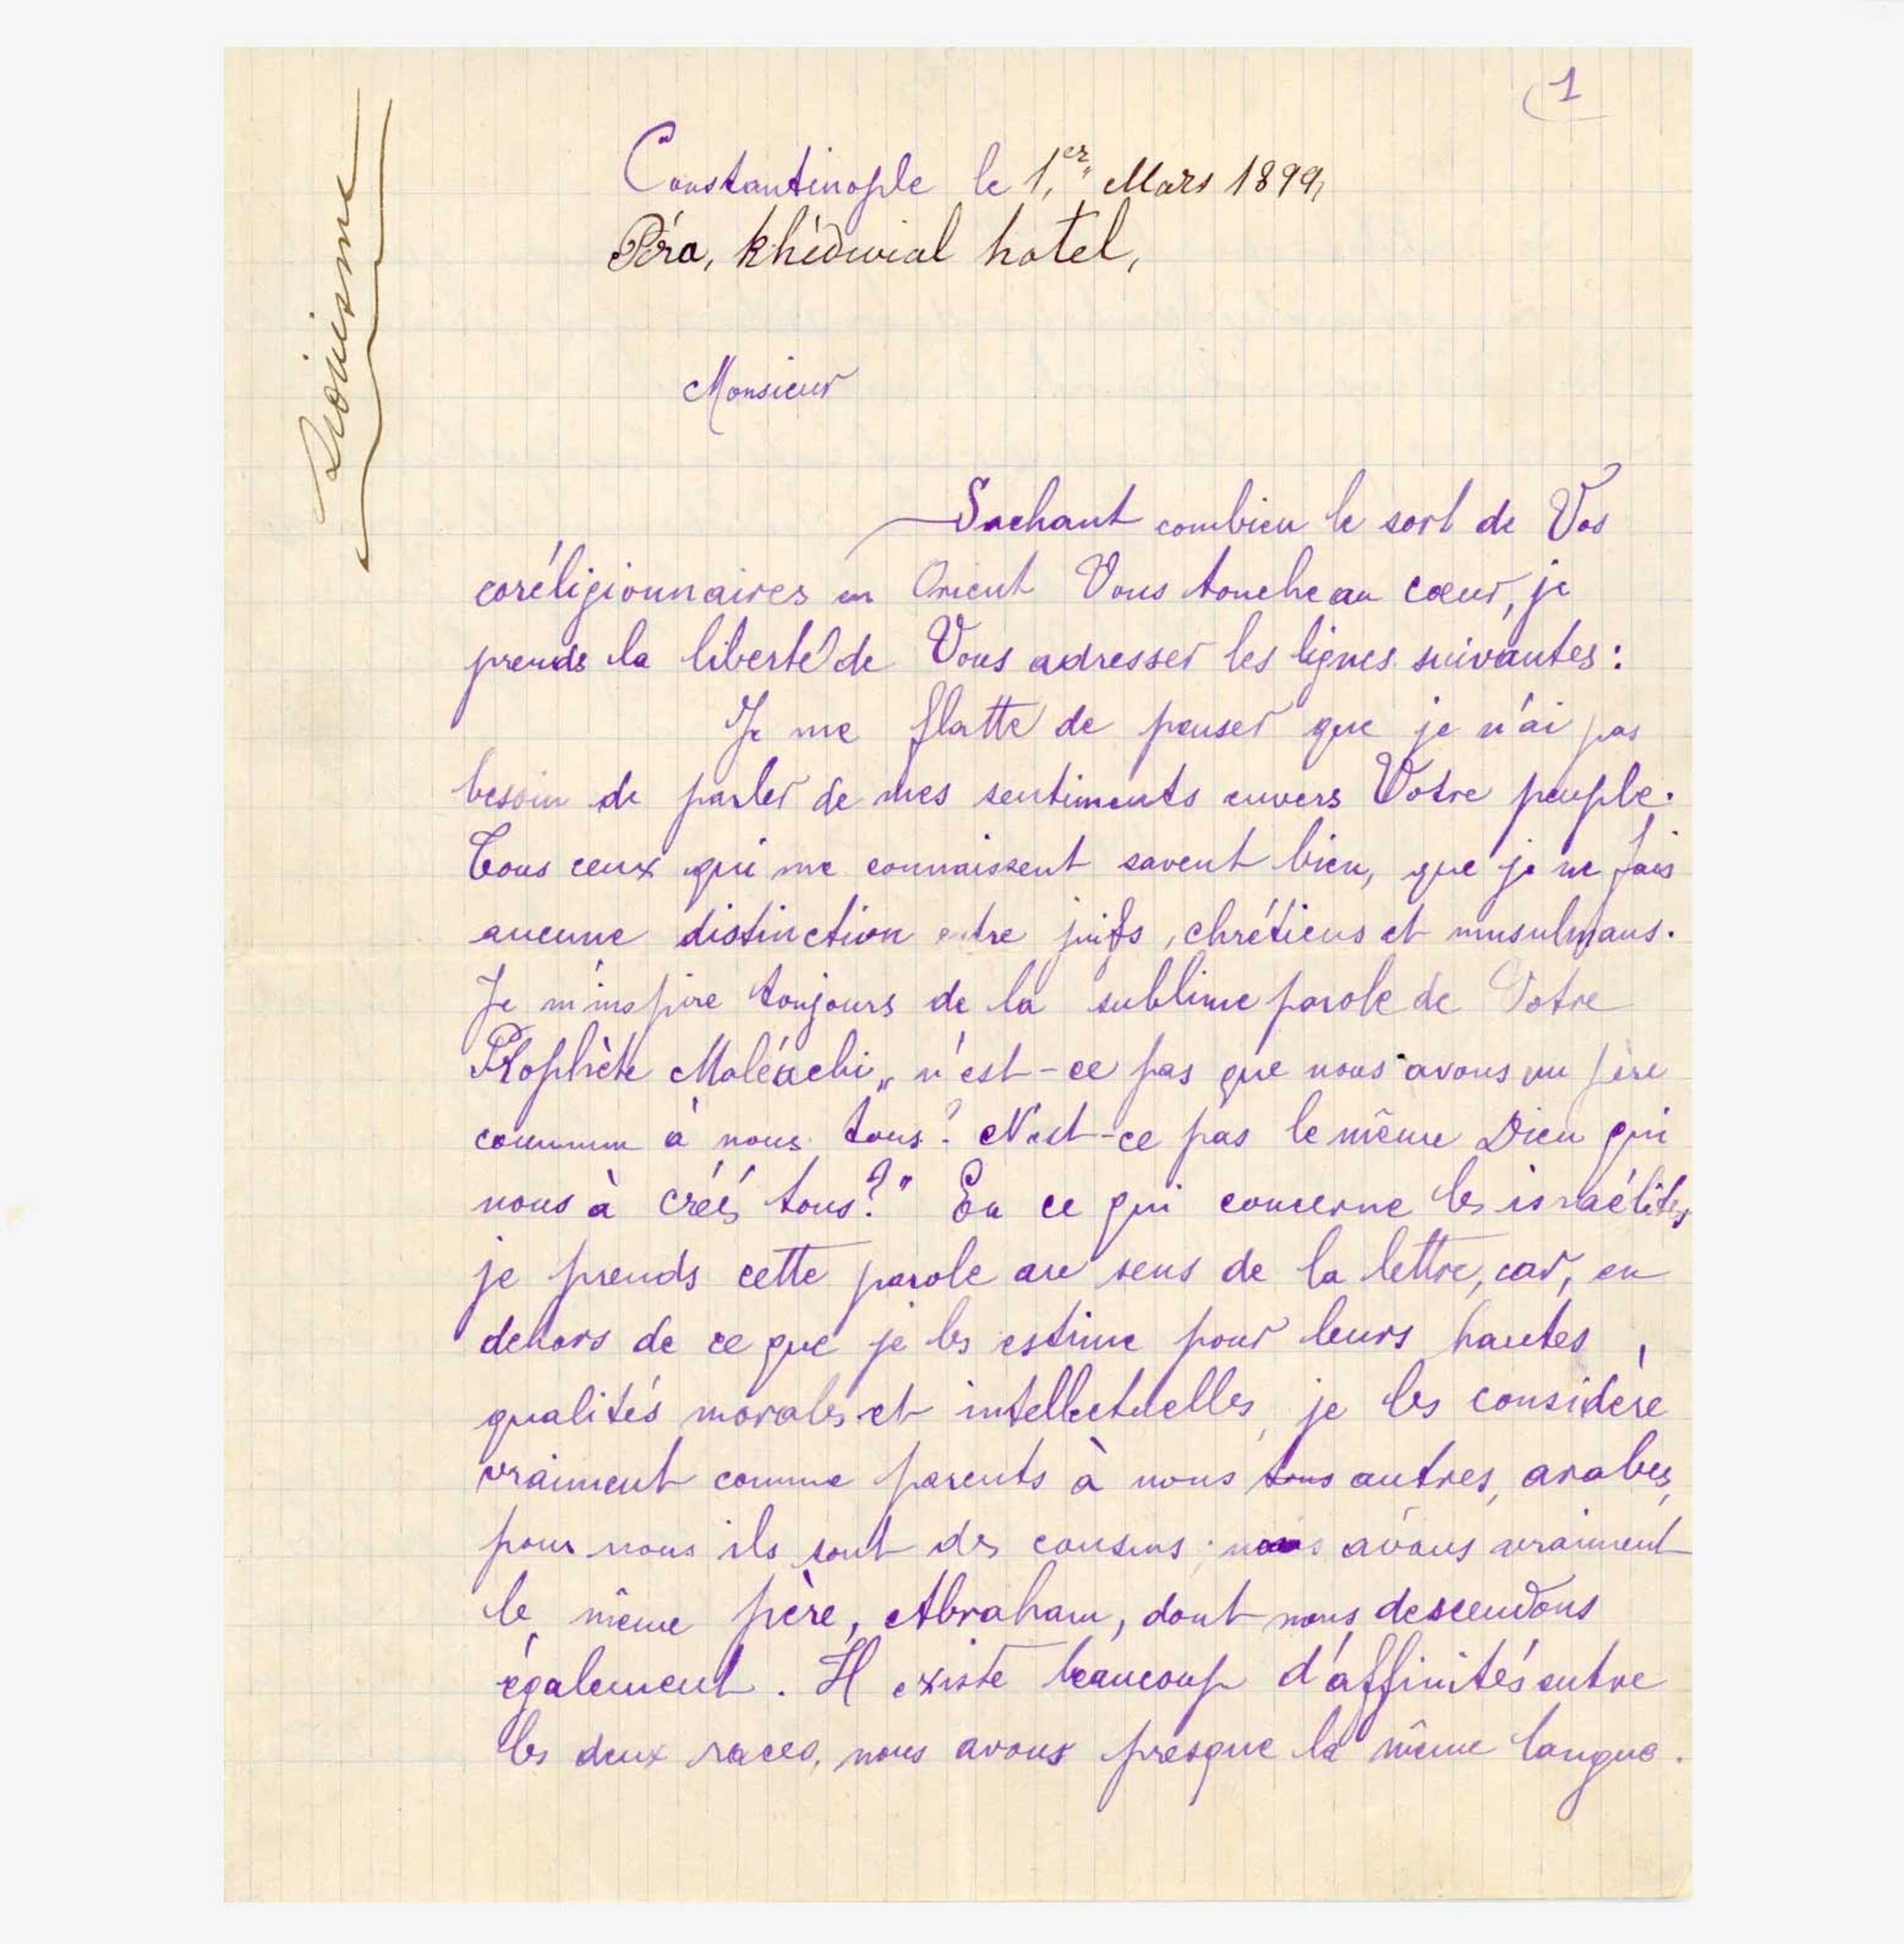 A page of the letter Yusuf Diya sent to Theodor Herzl.